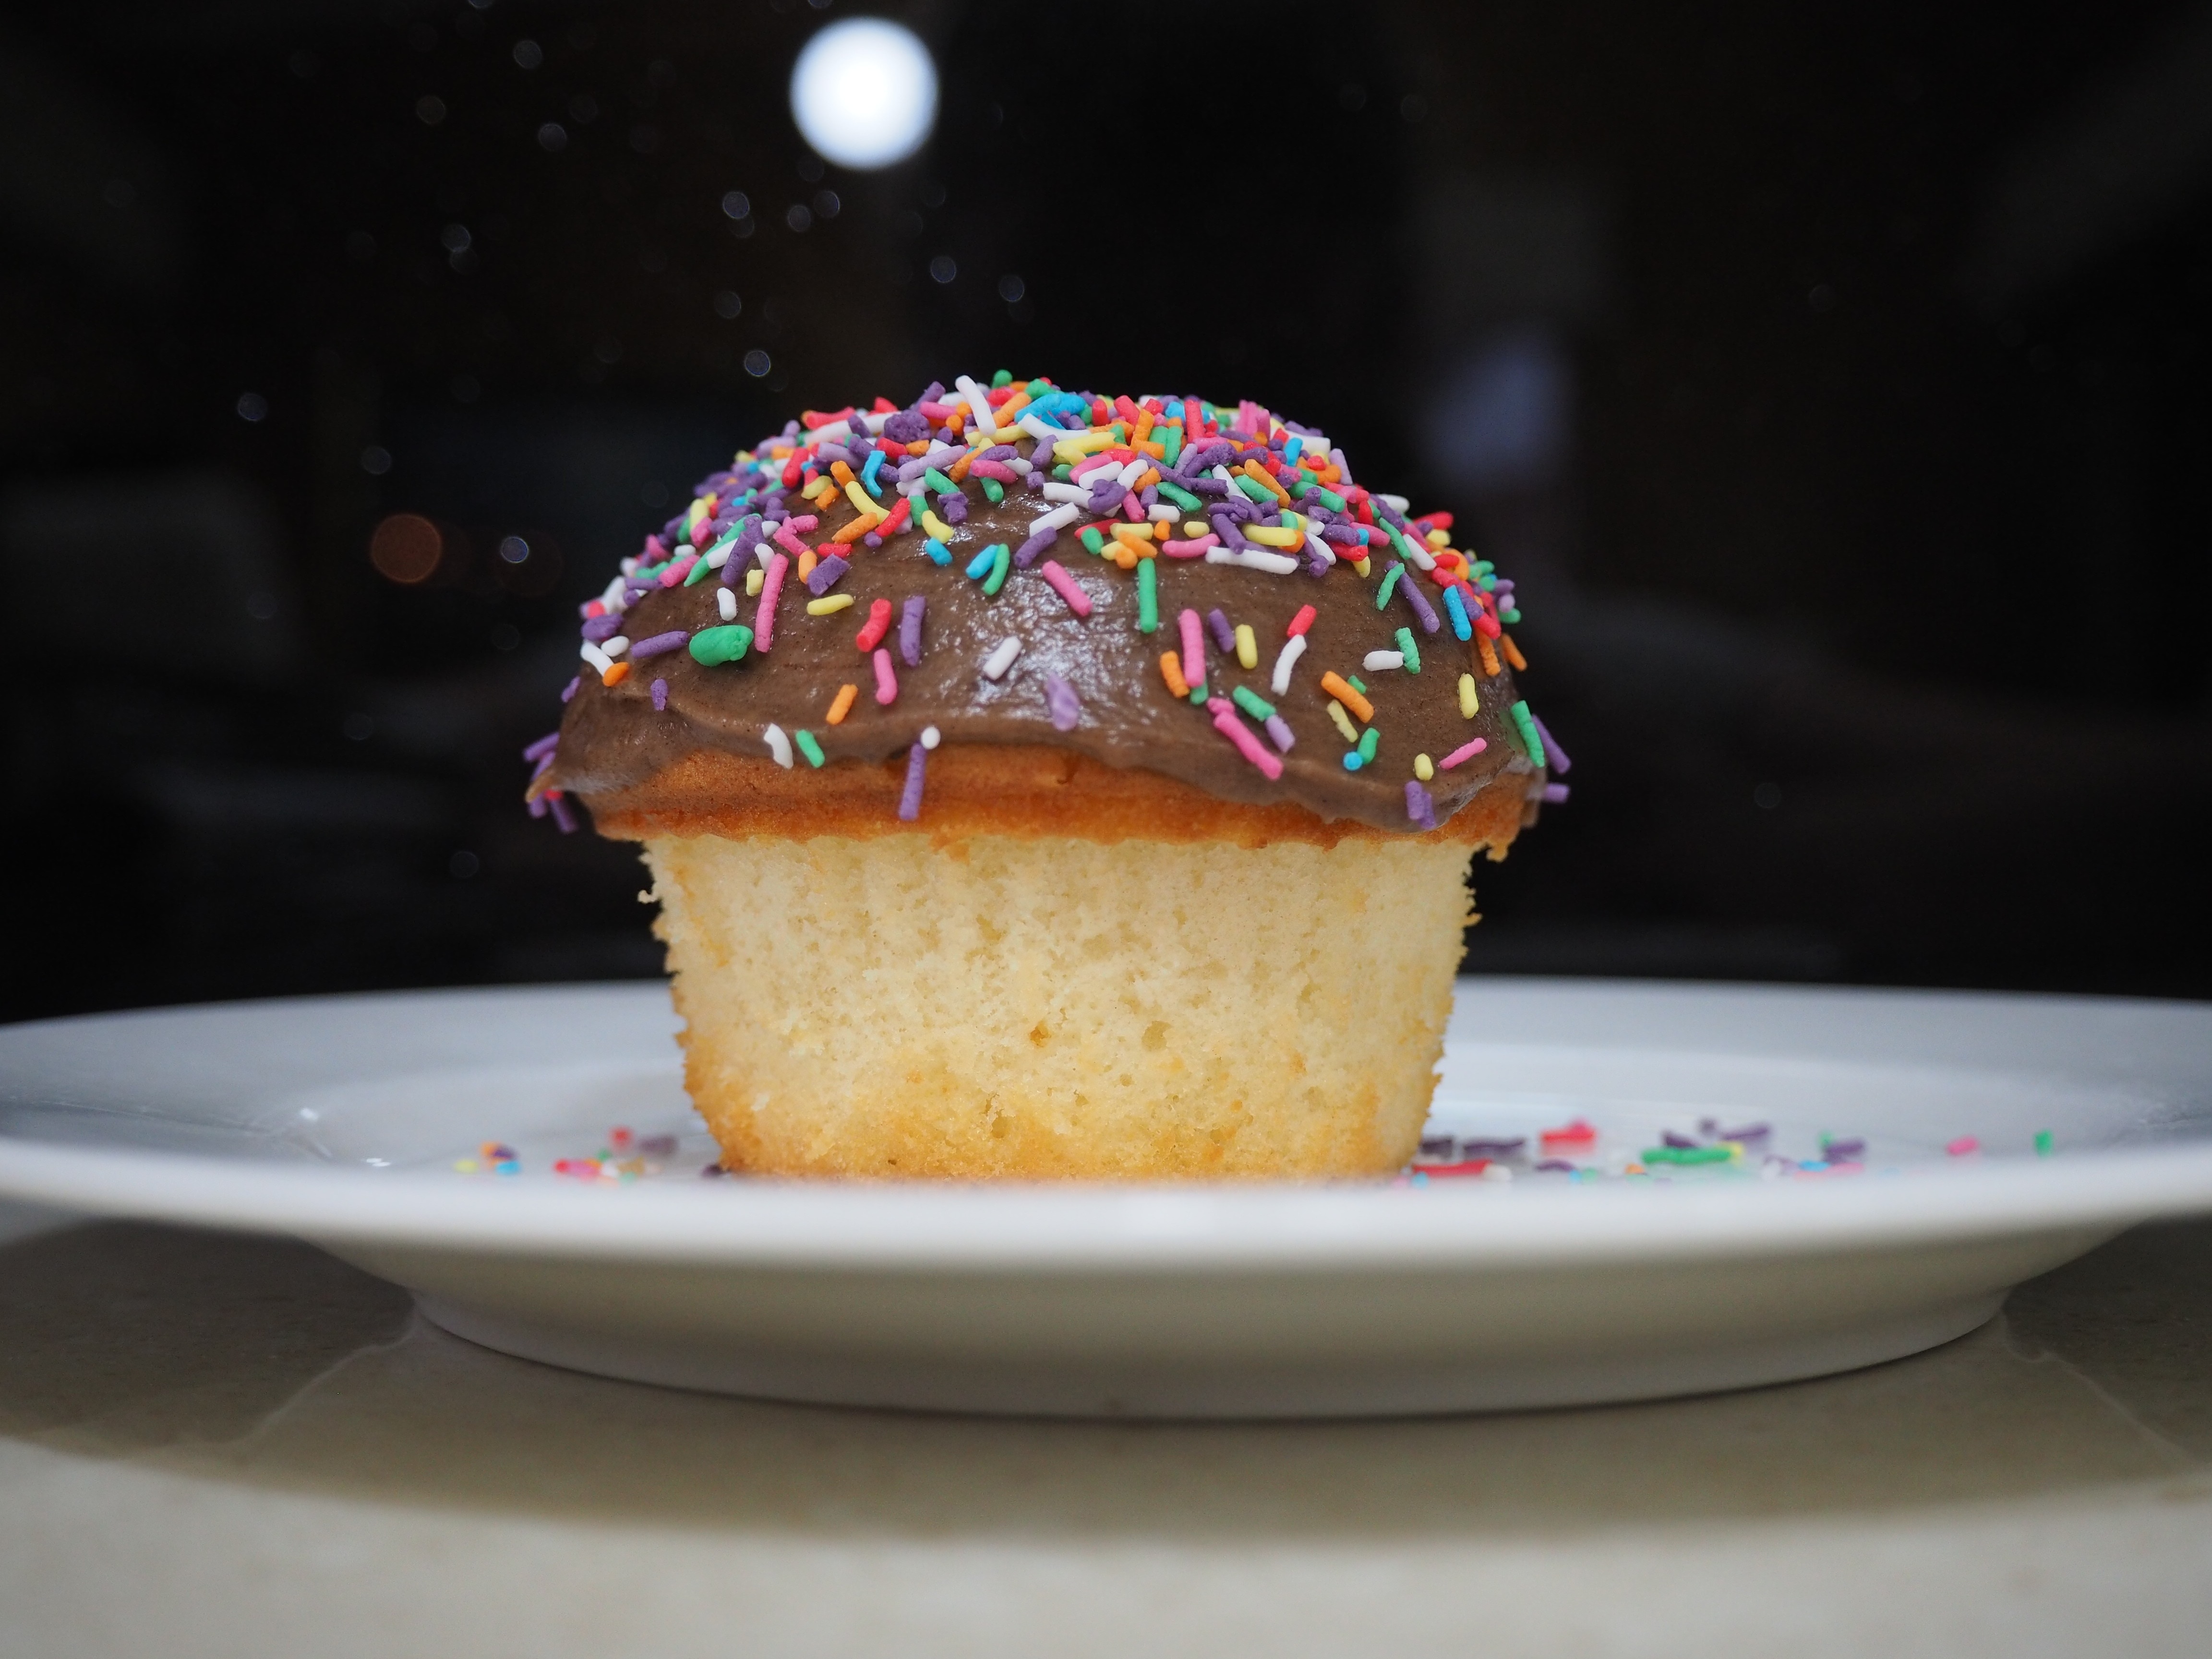 cupcake with chocolate and candy sprinkled